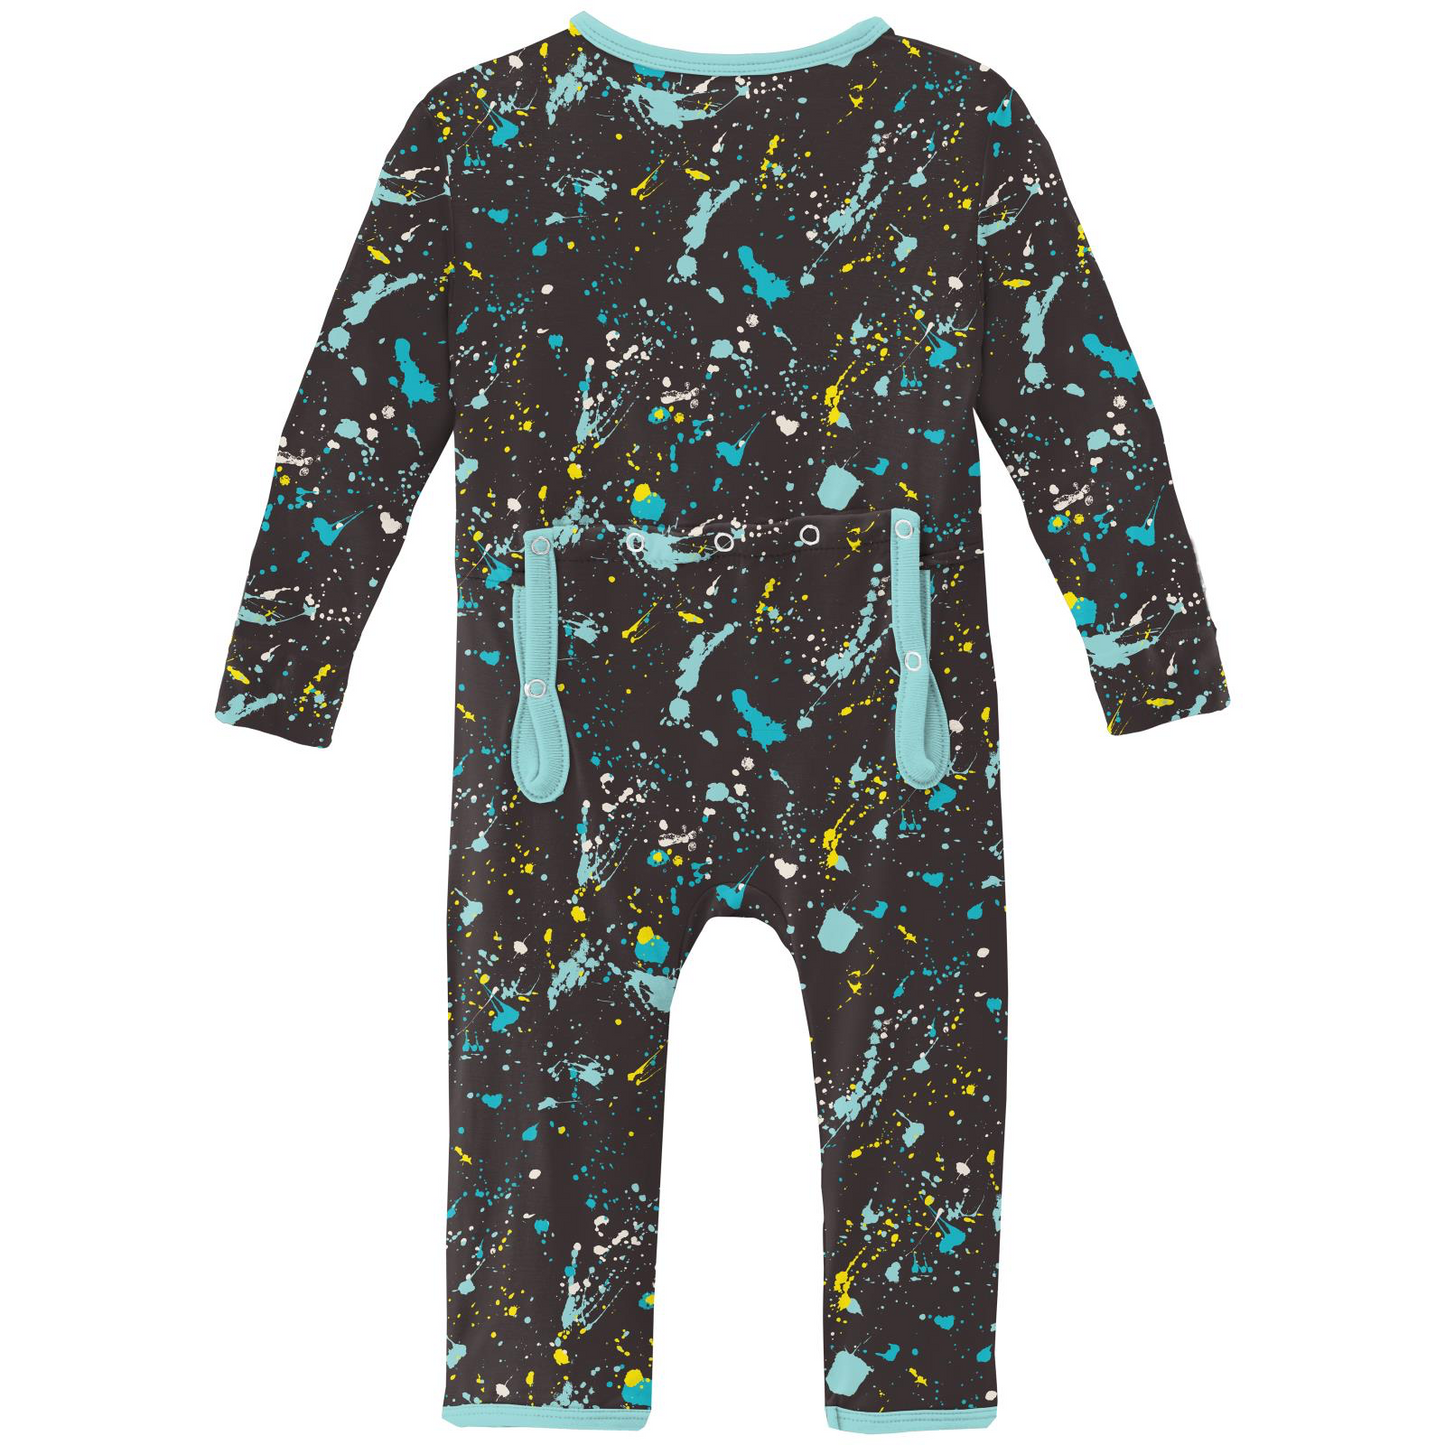 Confetti Splatter Paint Print Coverall with 2 Way Zipper